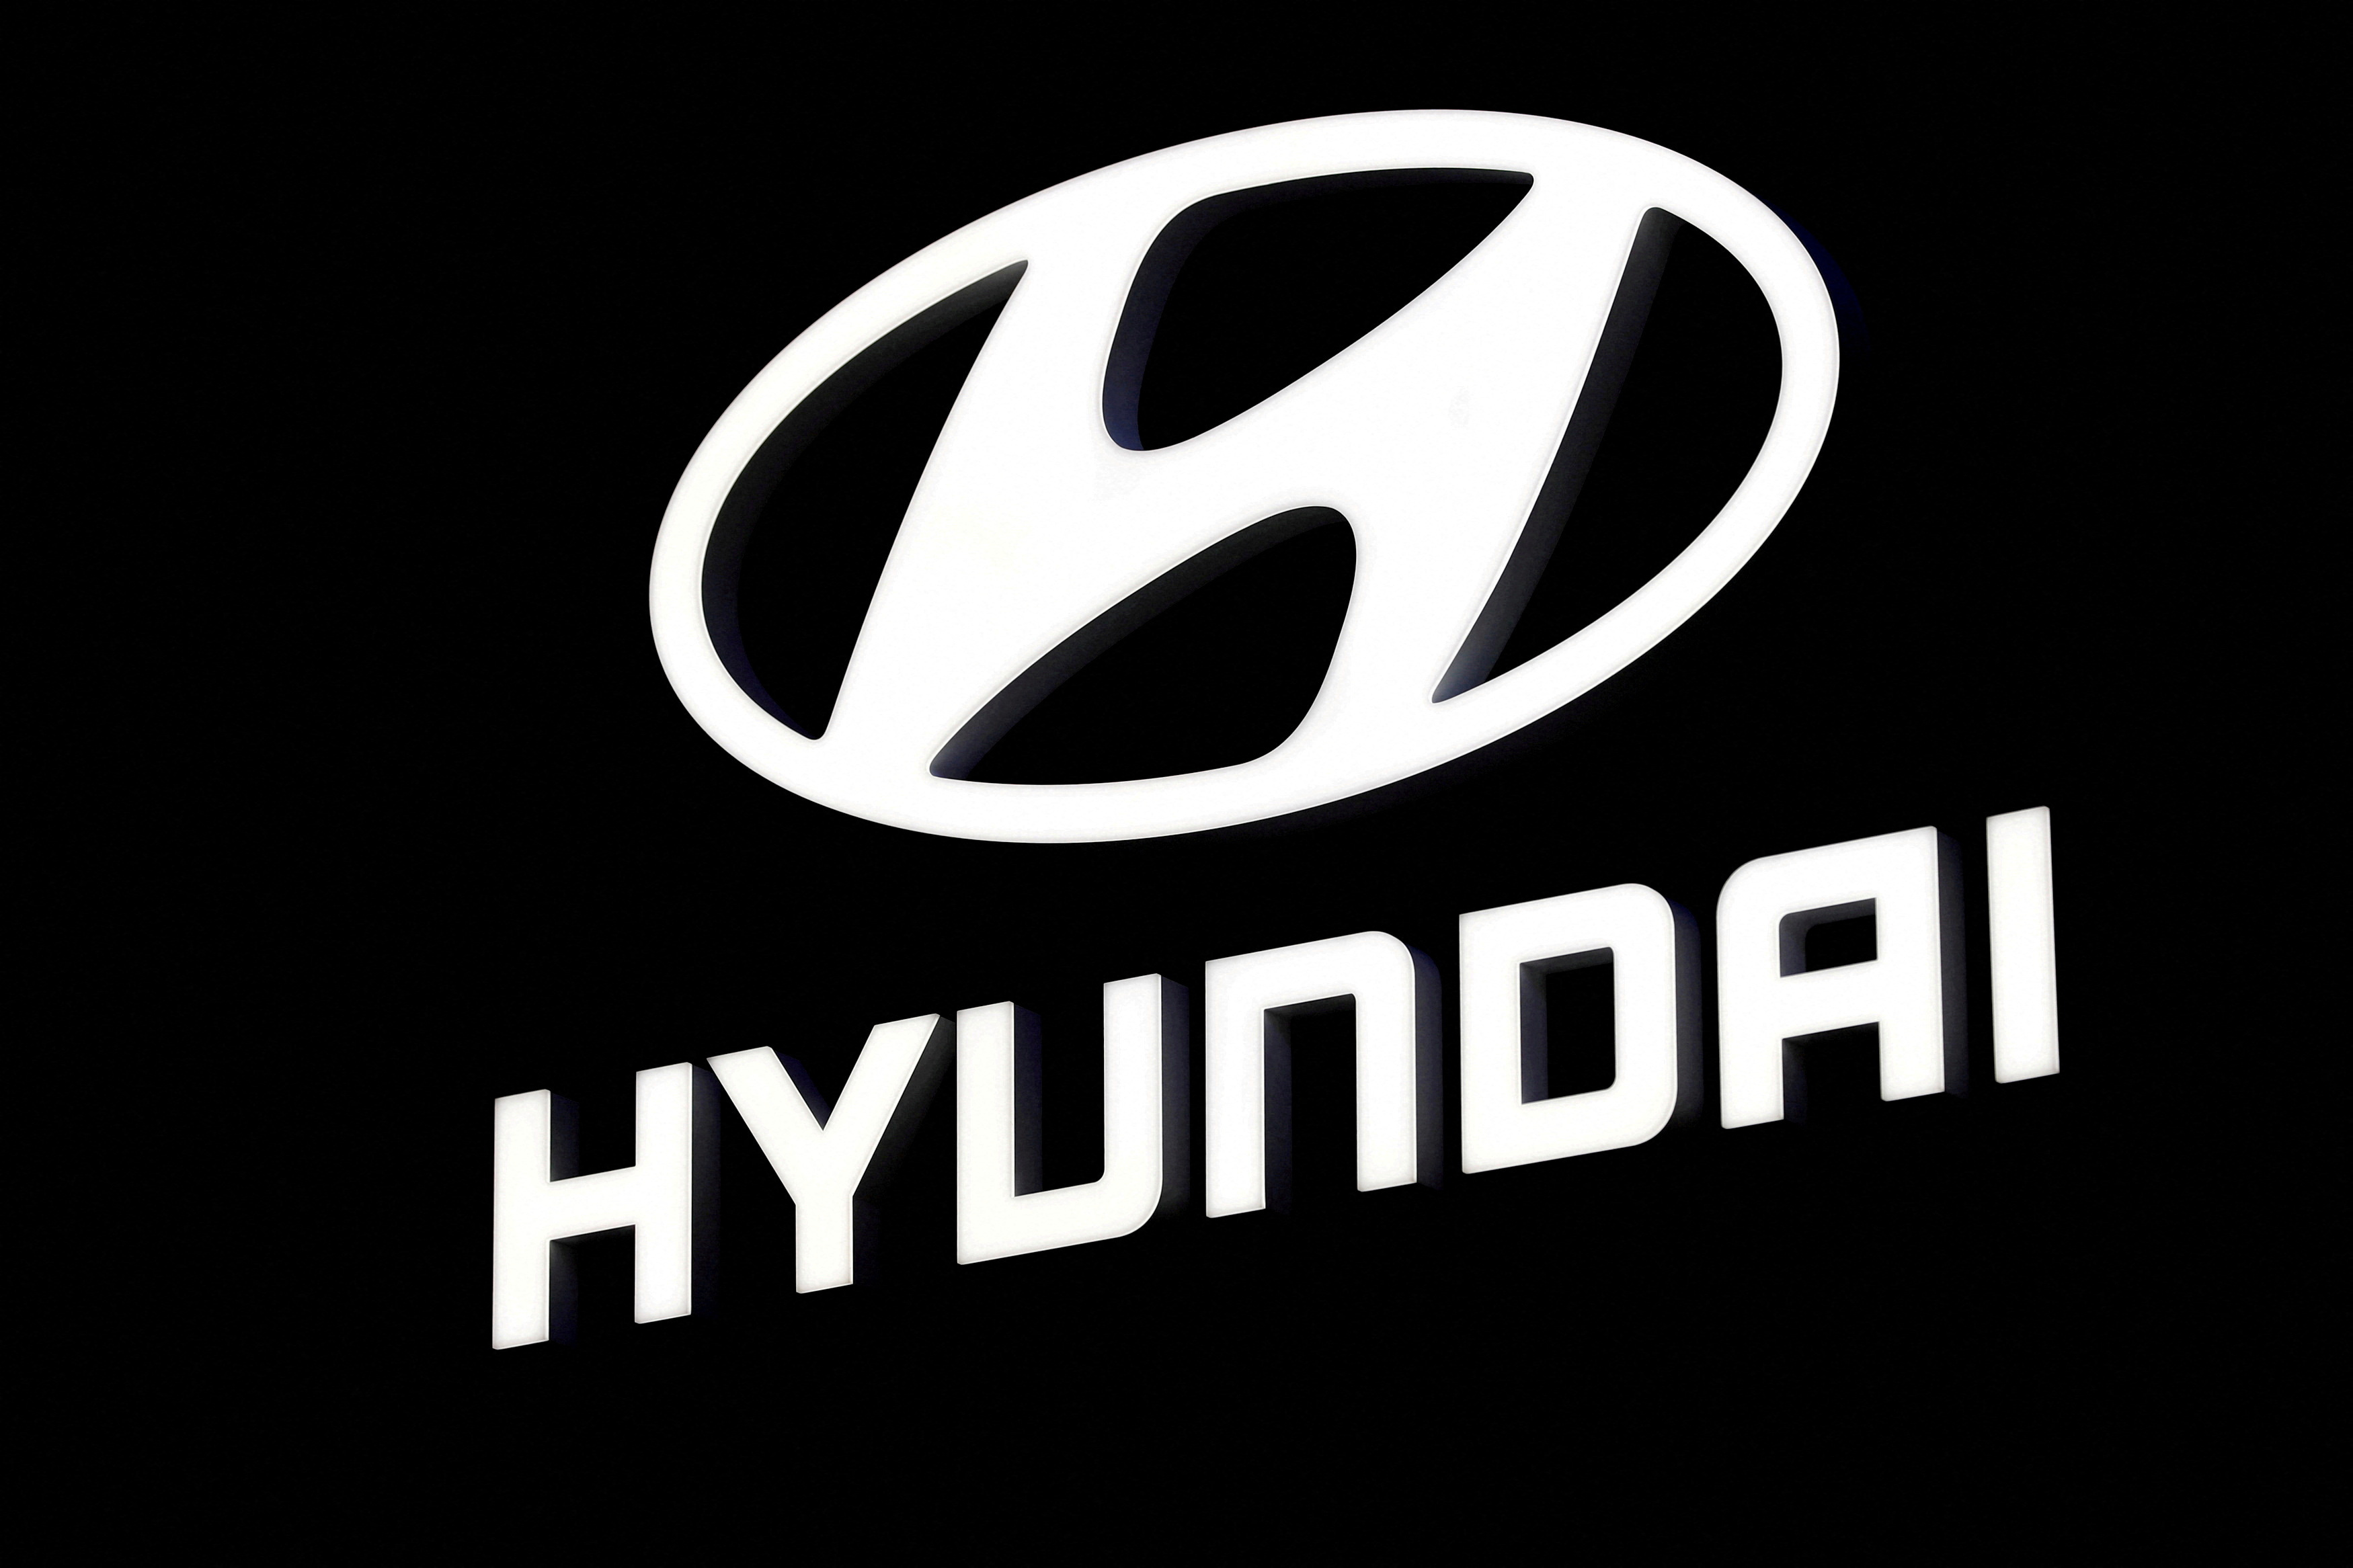 A Hyundai booth displays the company logo at the North American International Auto Show in Detroit